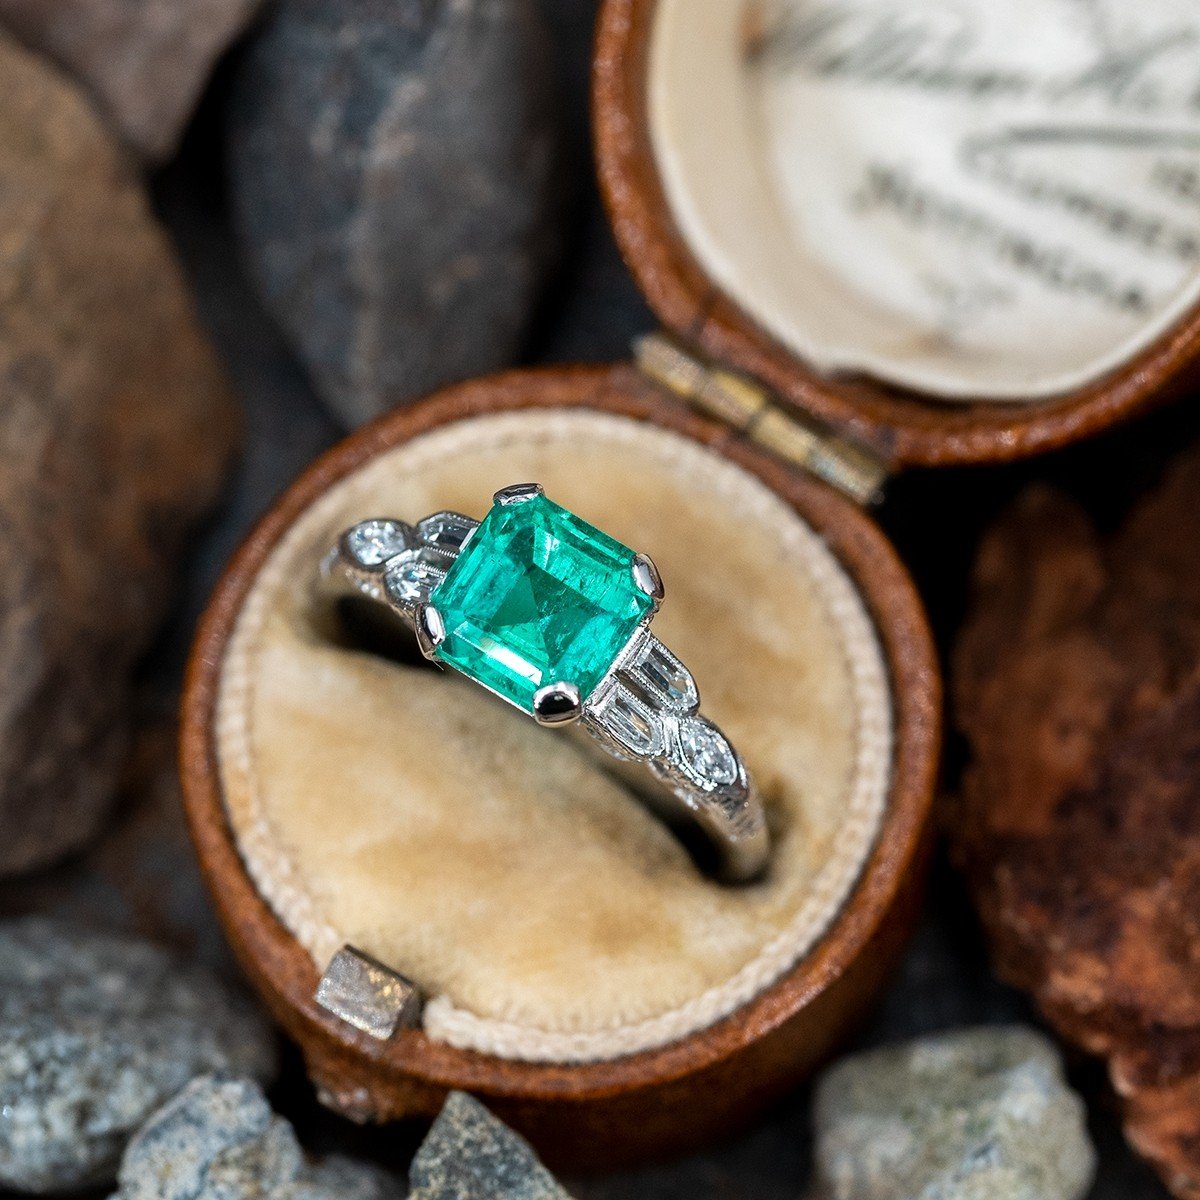 Vintage 1.46 Carat Colombian Emerald Ring in Platinum GIA